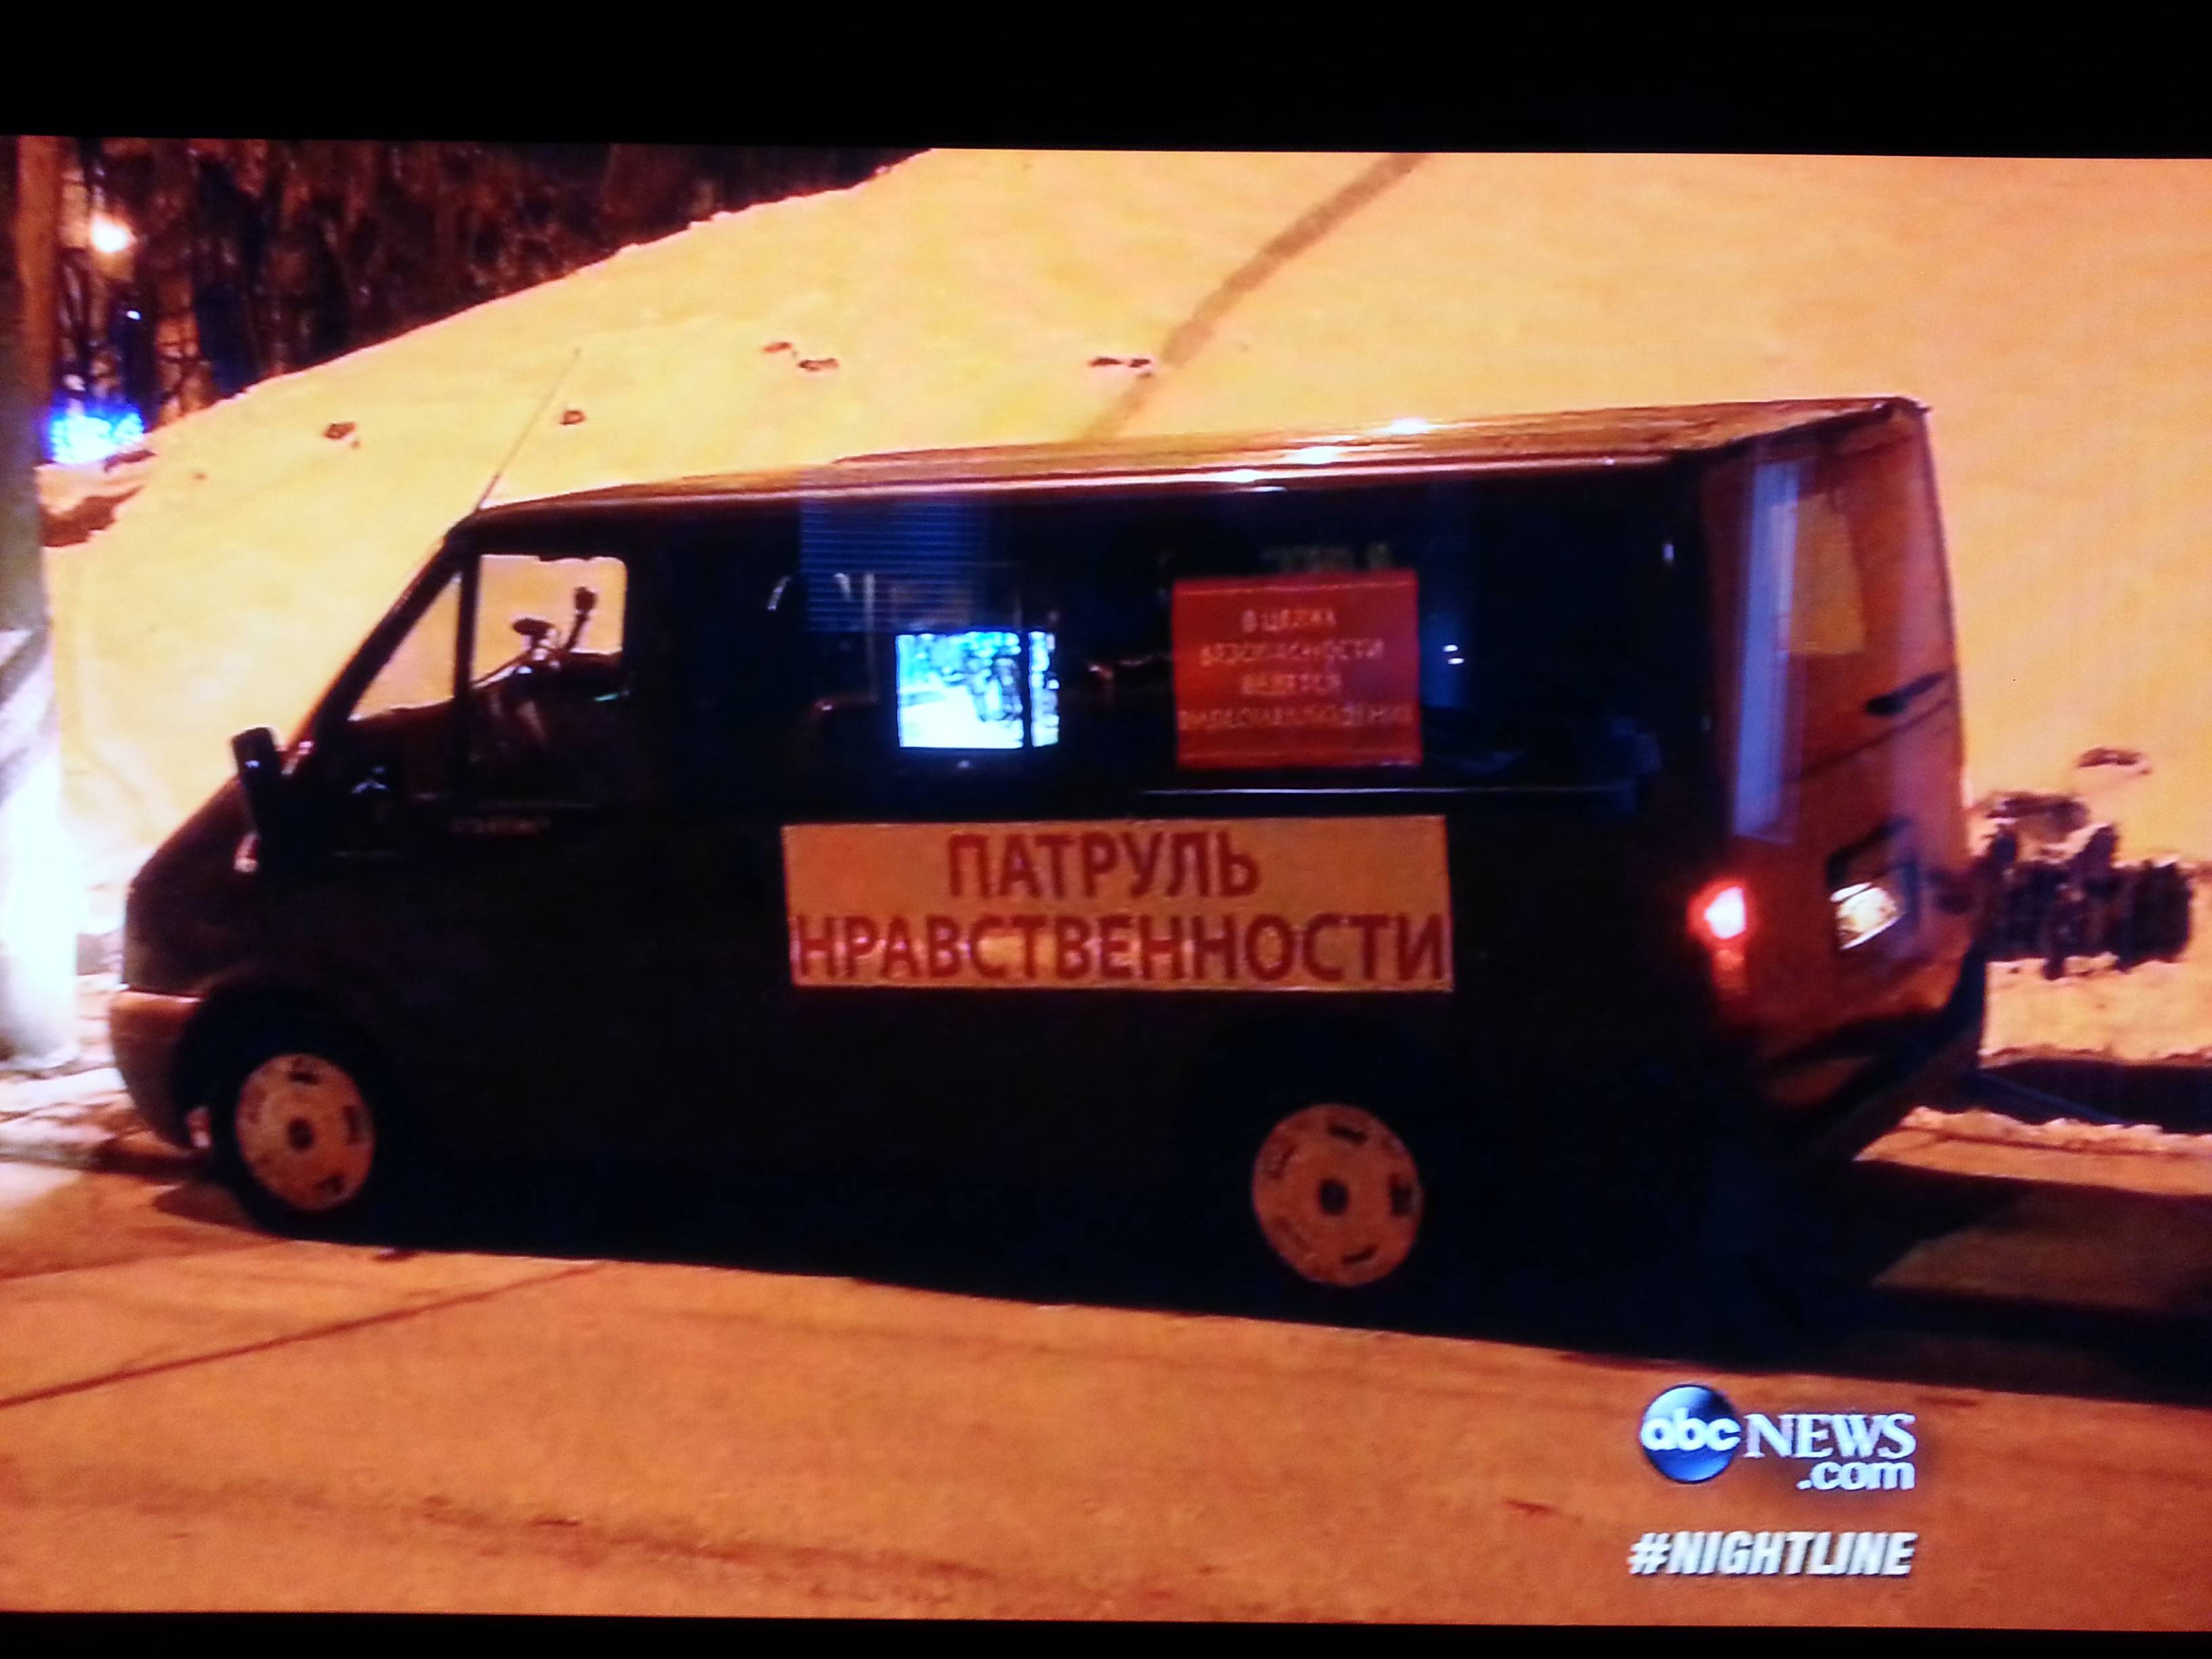 Morality patrol van monitors and records all people that come and go in a gay night club in Russia.